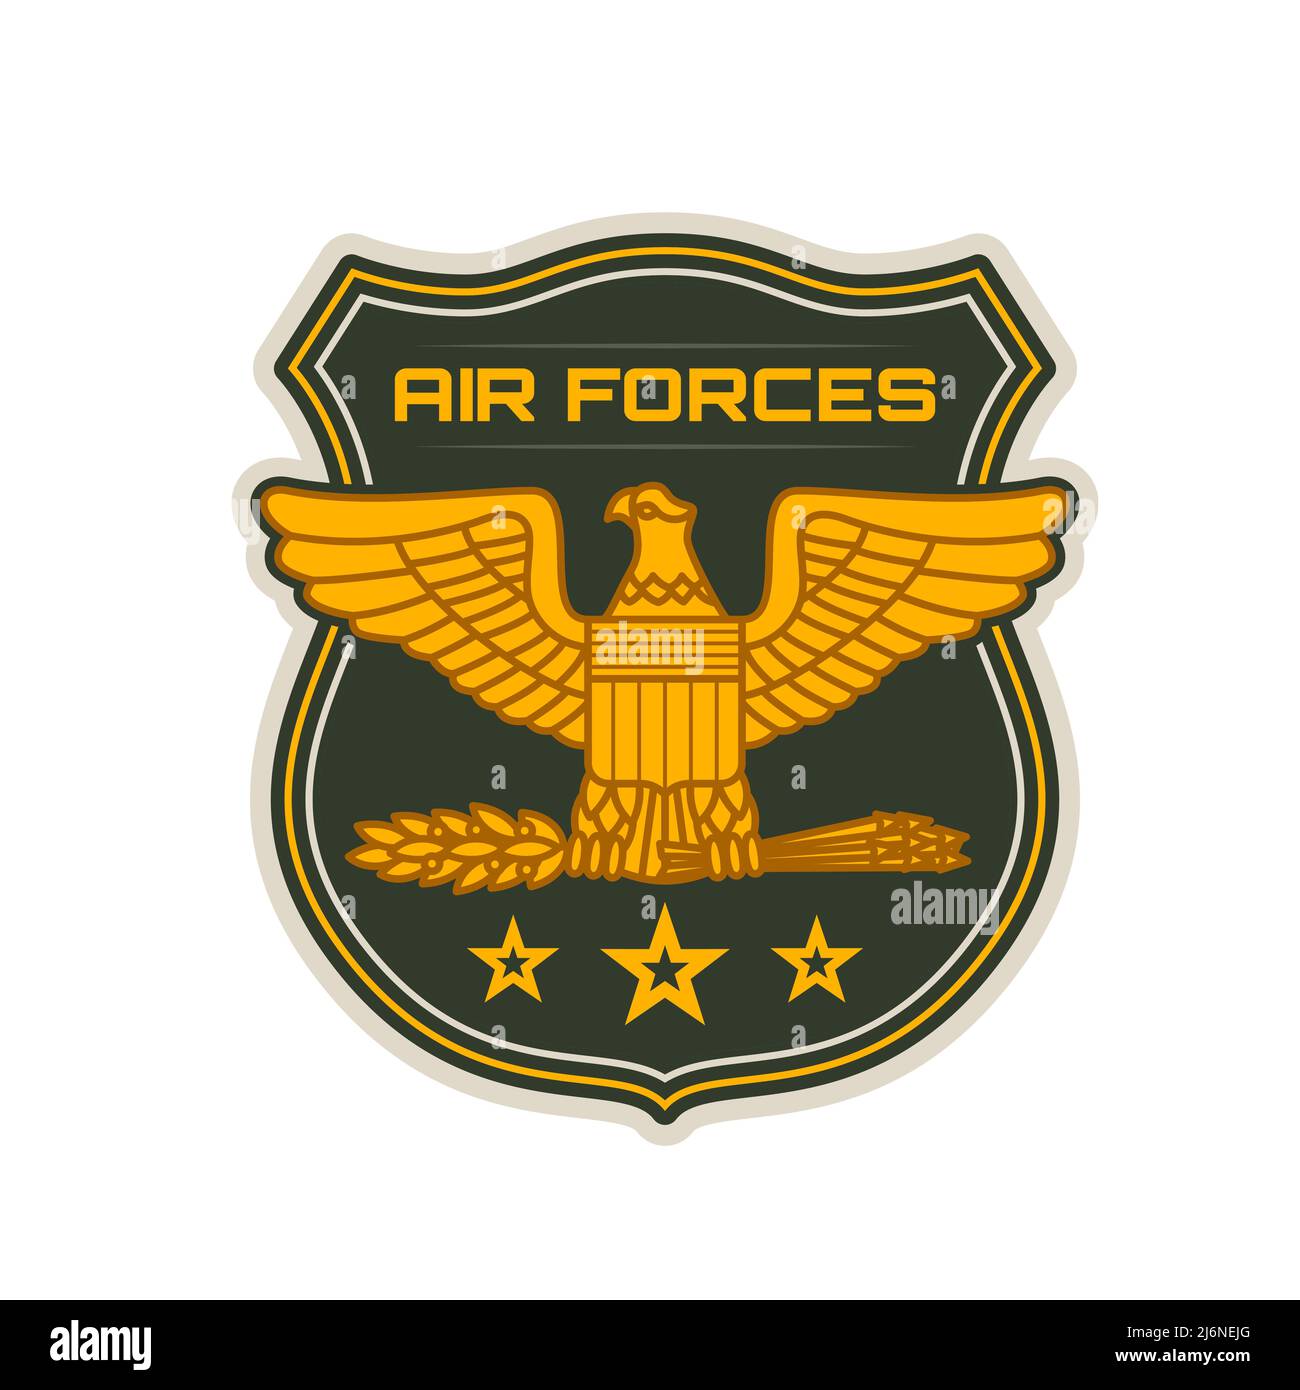 Air forces heraldic icon vector shield with gold eagle, wings, arrows and stars. Army or navy aviation, military aircraft division, flight, group or squadron isolated symbol and patch design Stock Vector